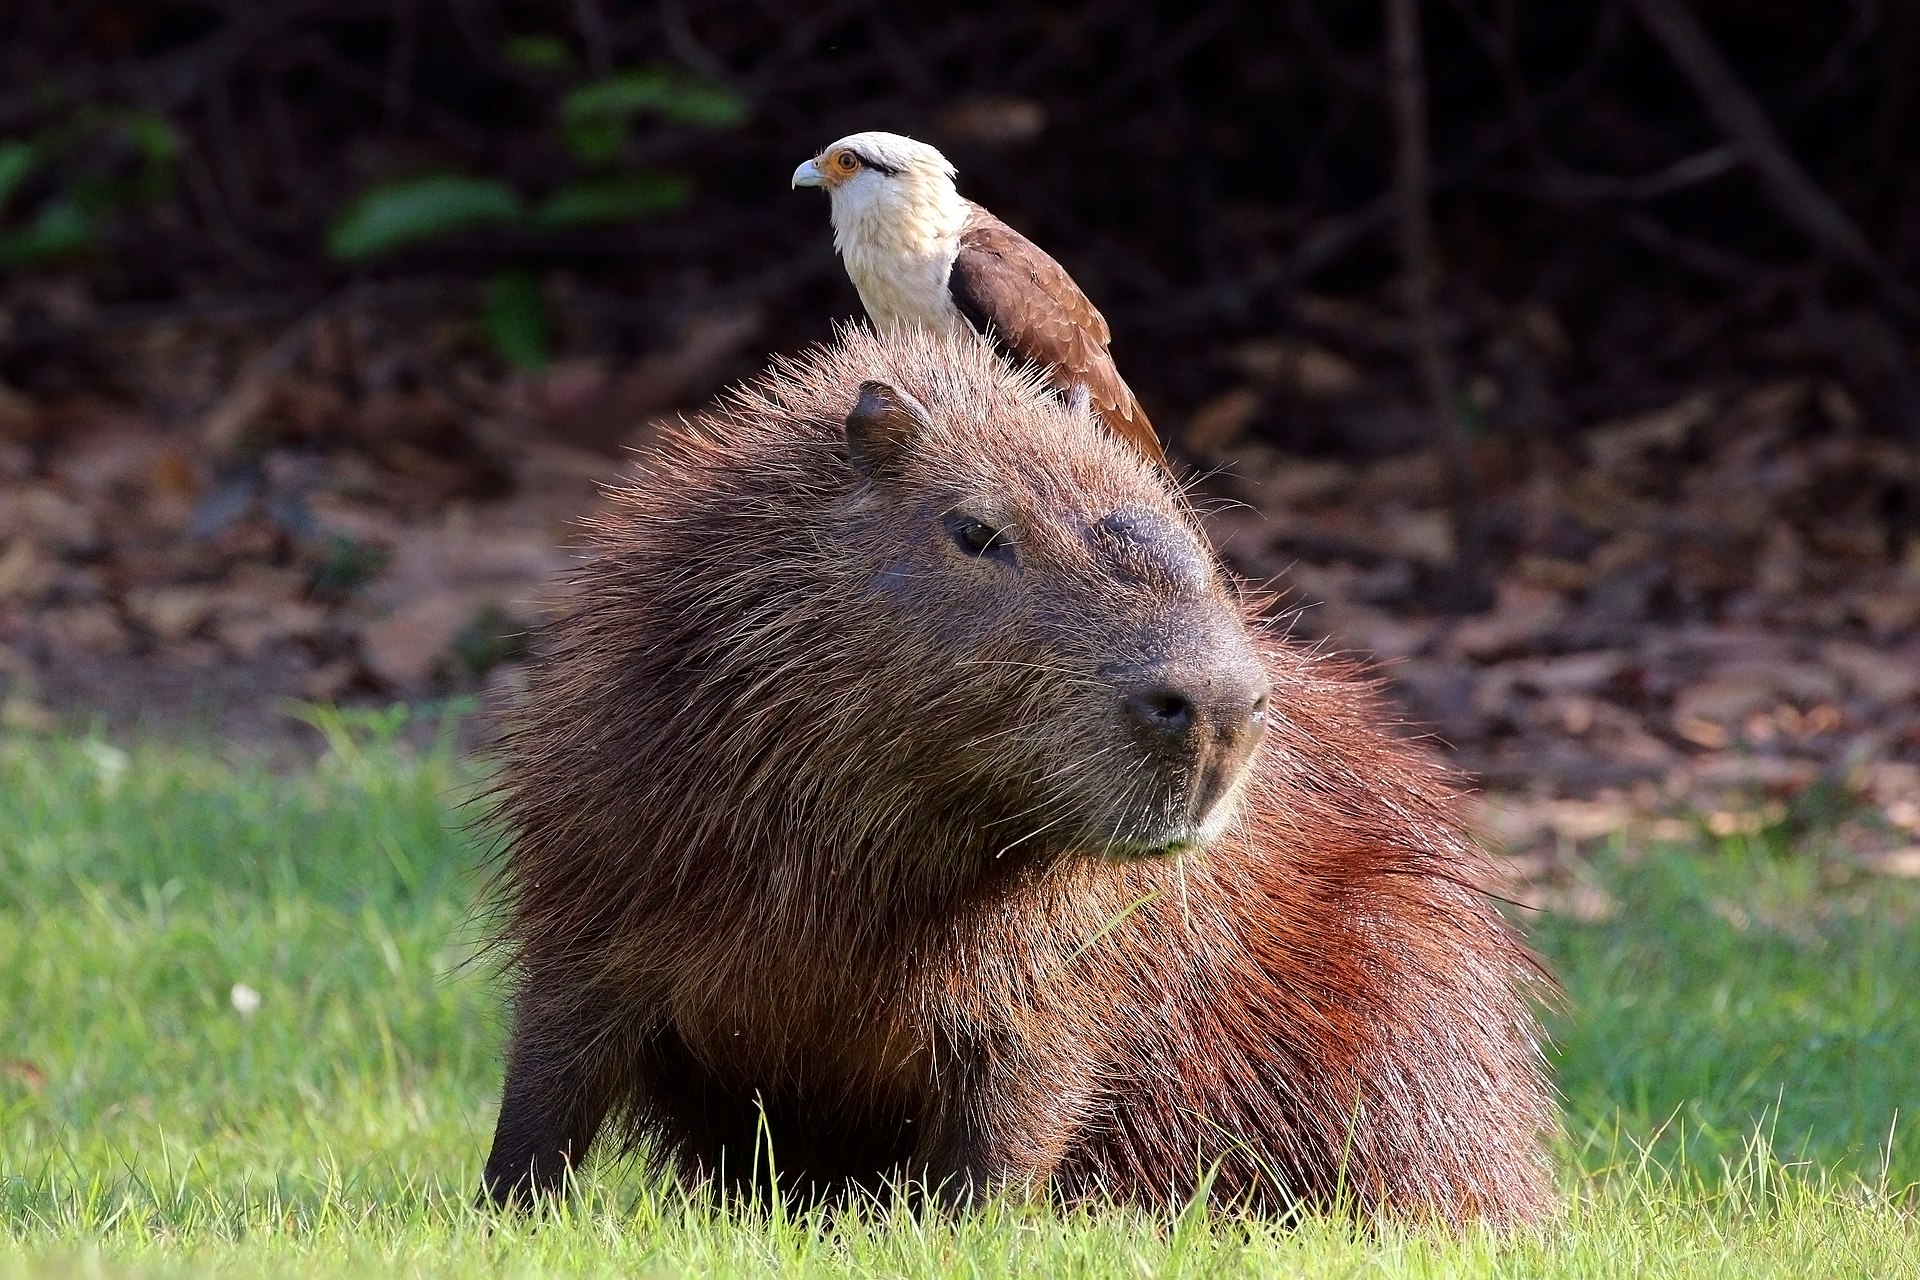 someone said to make floppa or capybara but now I can't find the